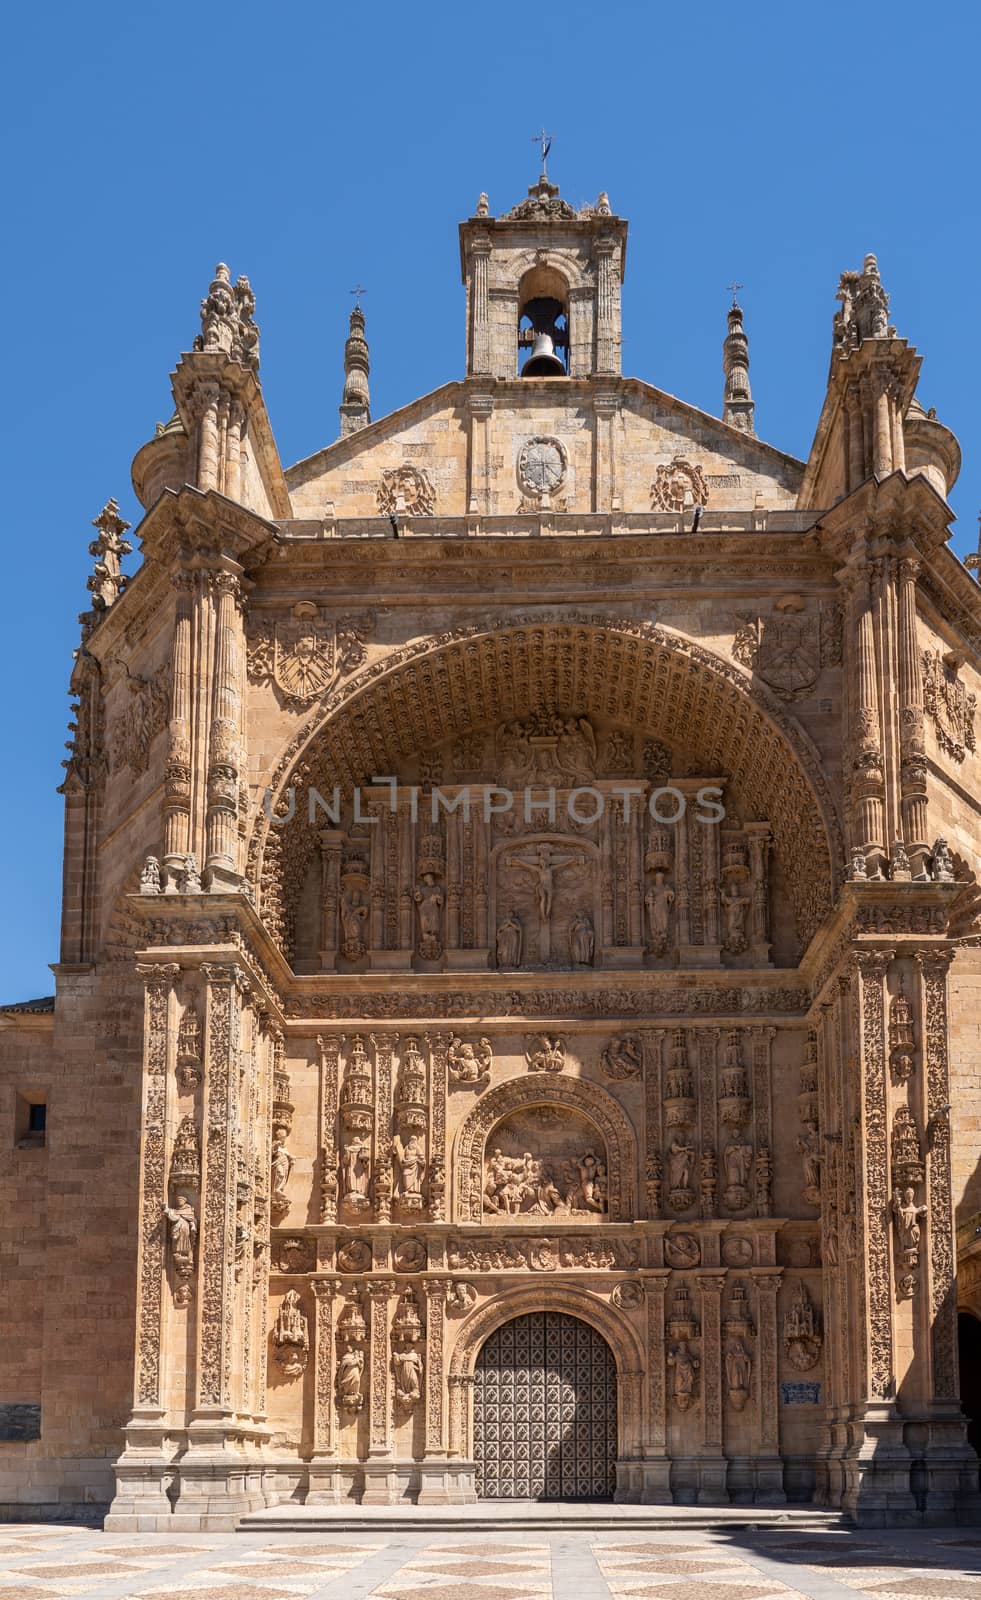 Convent of San Estaban in the center of old Salamanca in Spain by steheap